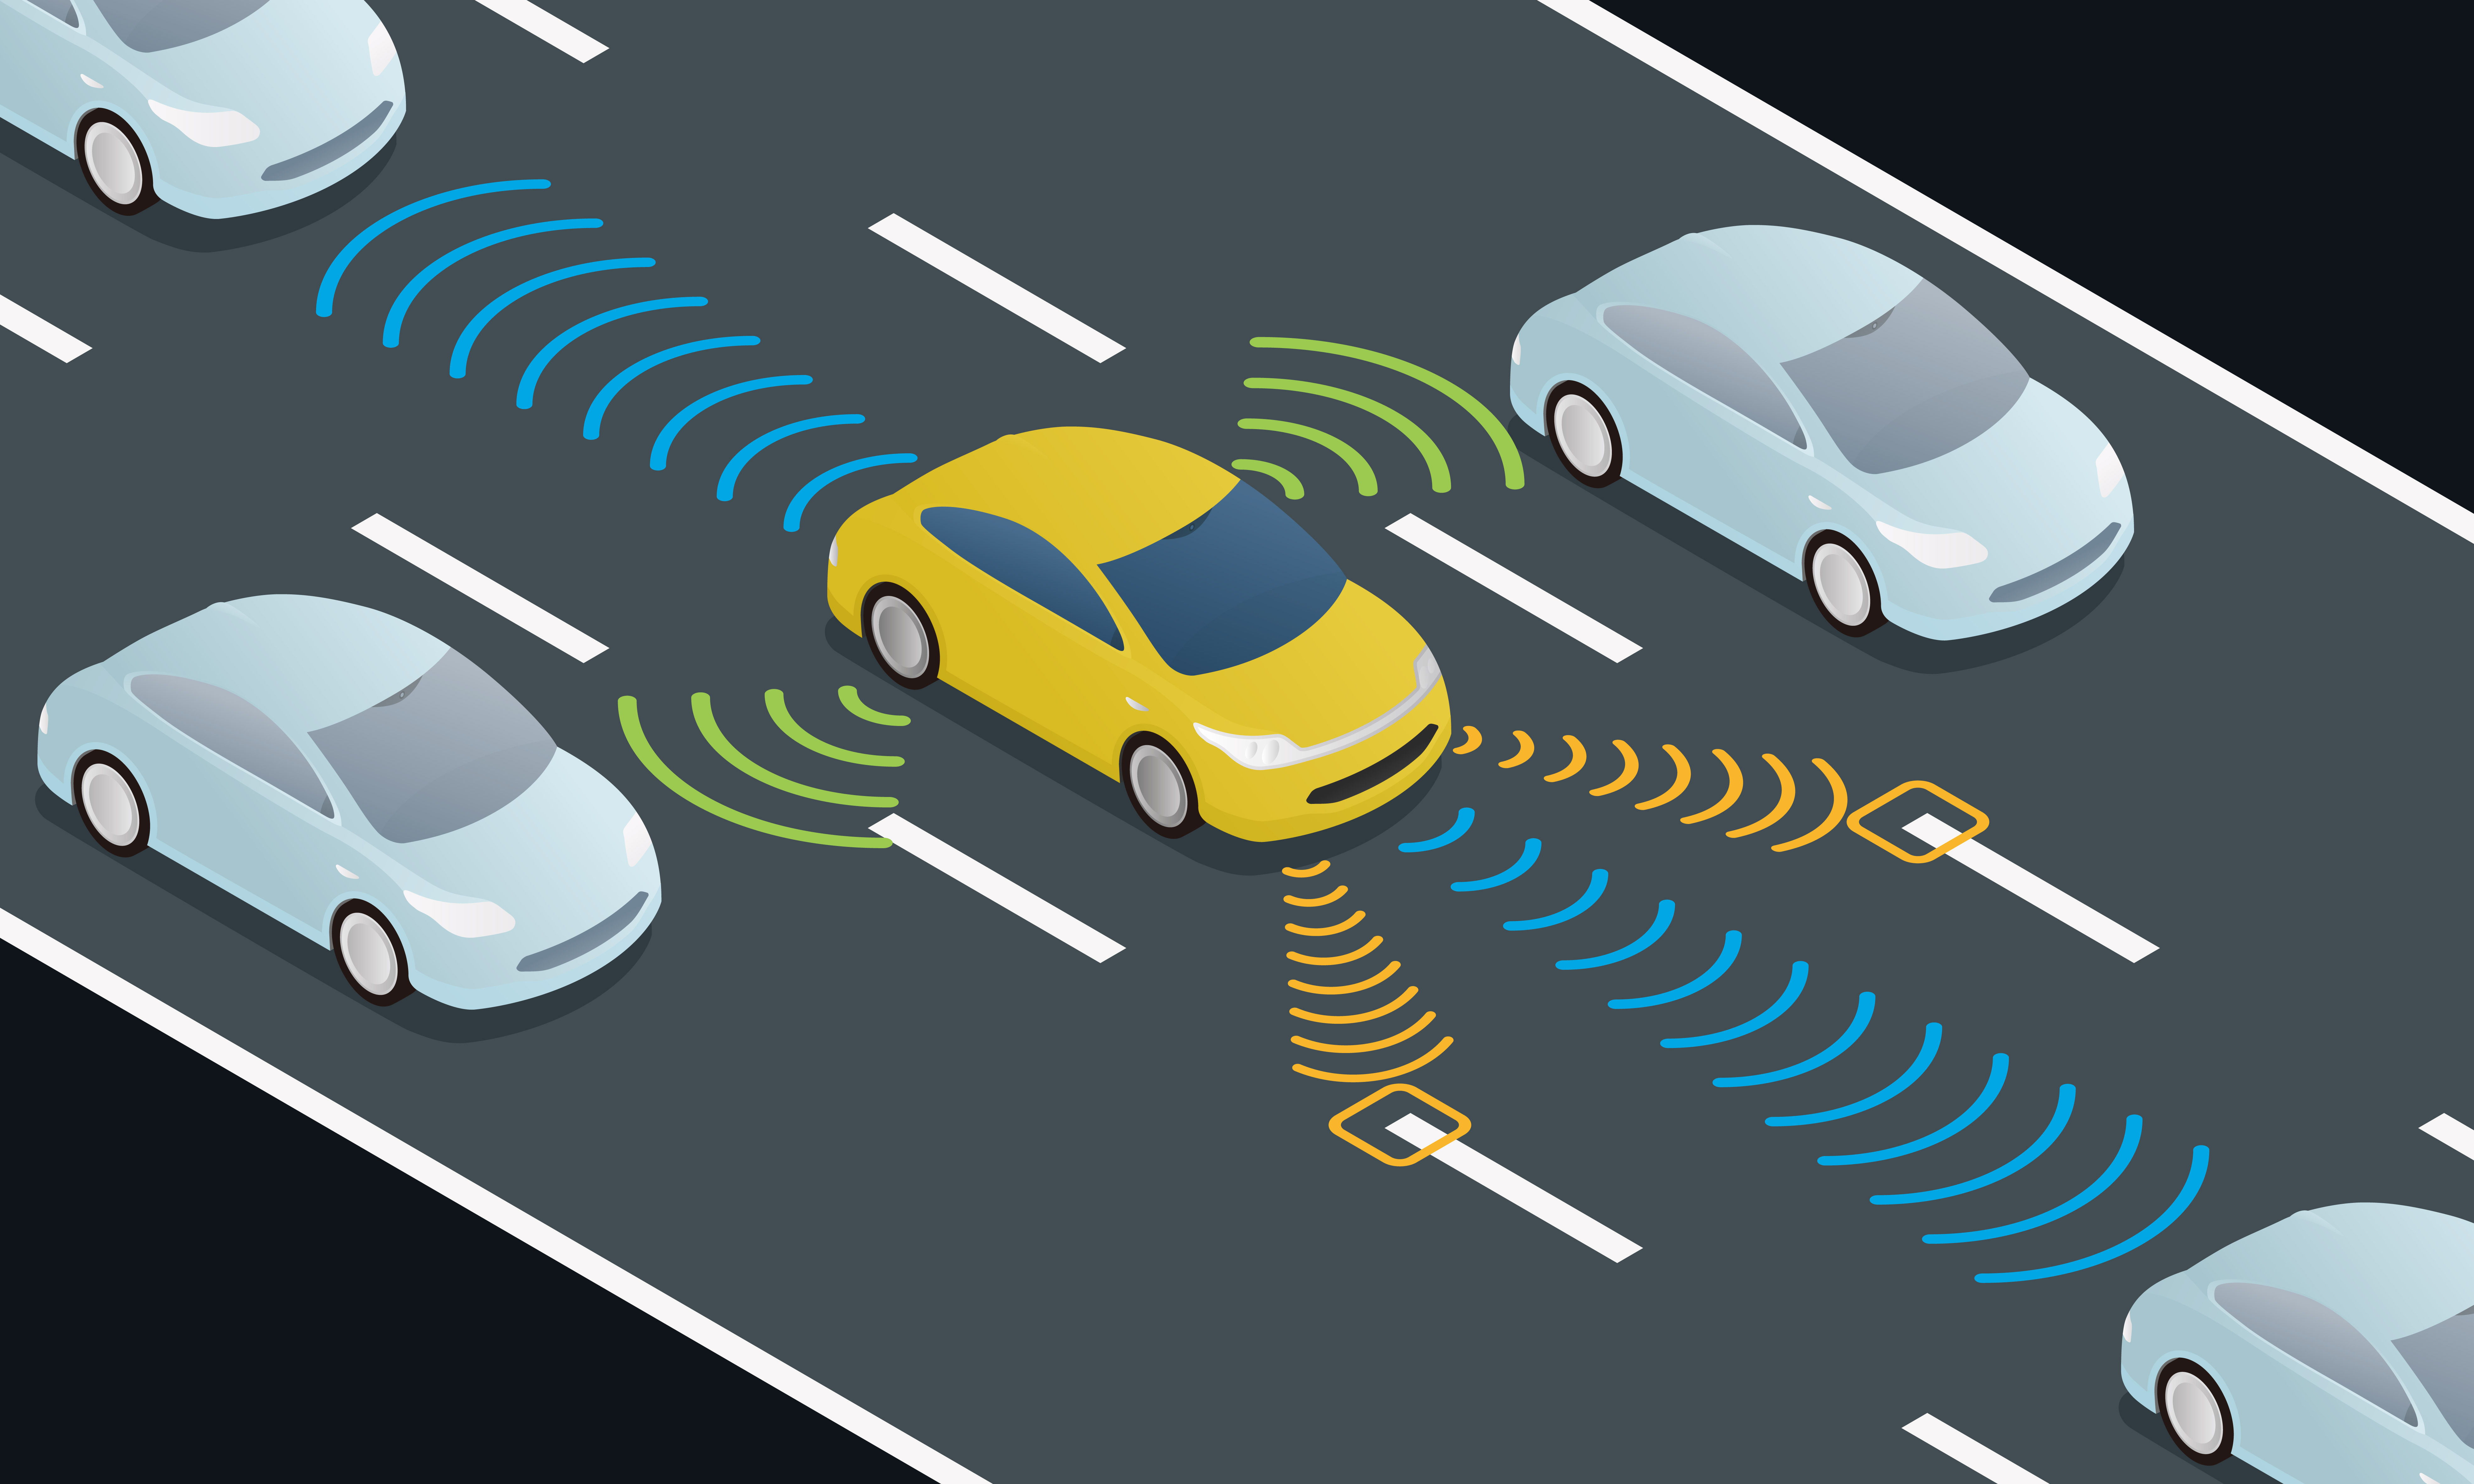 Autonomous,Car,Driving,On,Road,And,Sensing,Systems,,Driverless,Car,